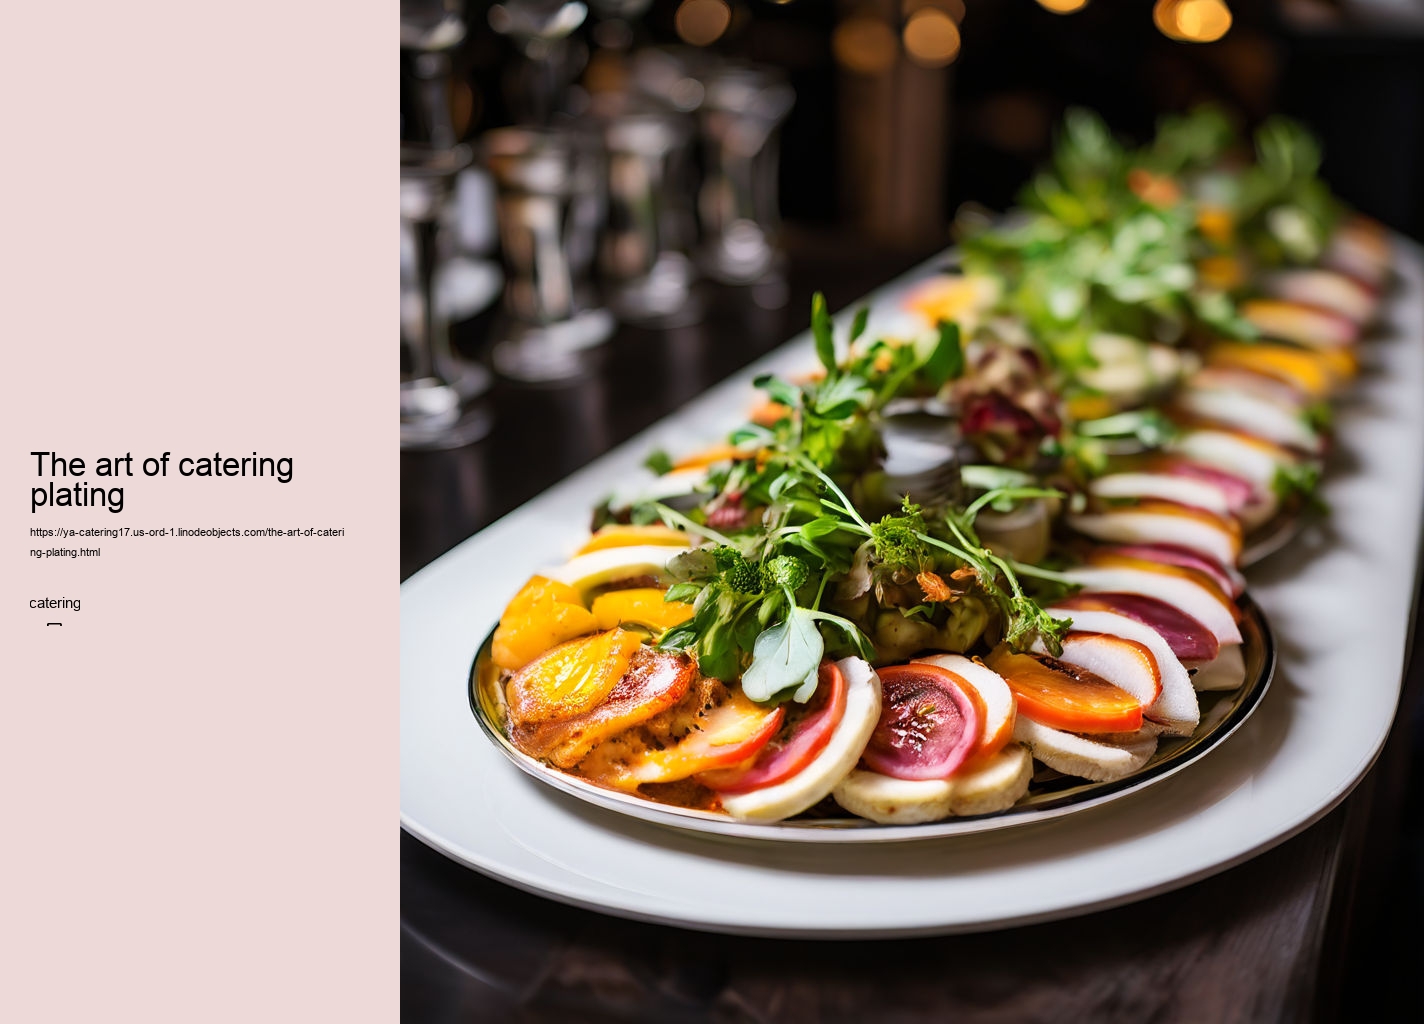 The art of catering plating